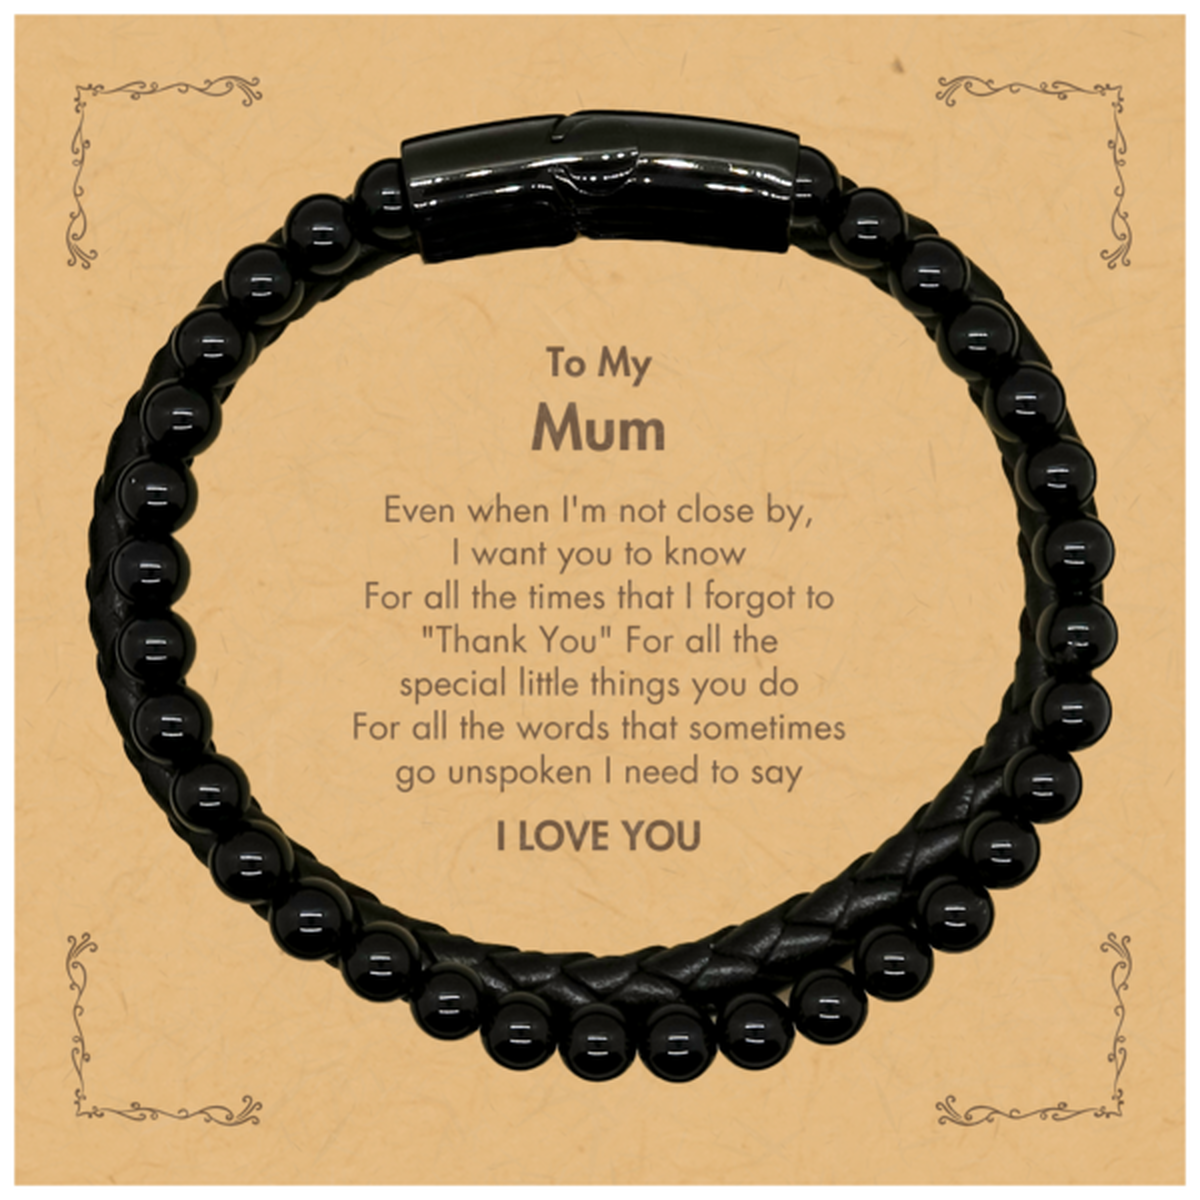 Thank You Gifts for Mum, Keepsake Stone Leather Bracelets Gifts for Mum Birthday Mother's day Father's Day Mum For all the words That sometimes go unspoken I need to say I LOVE YOU